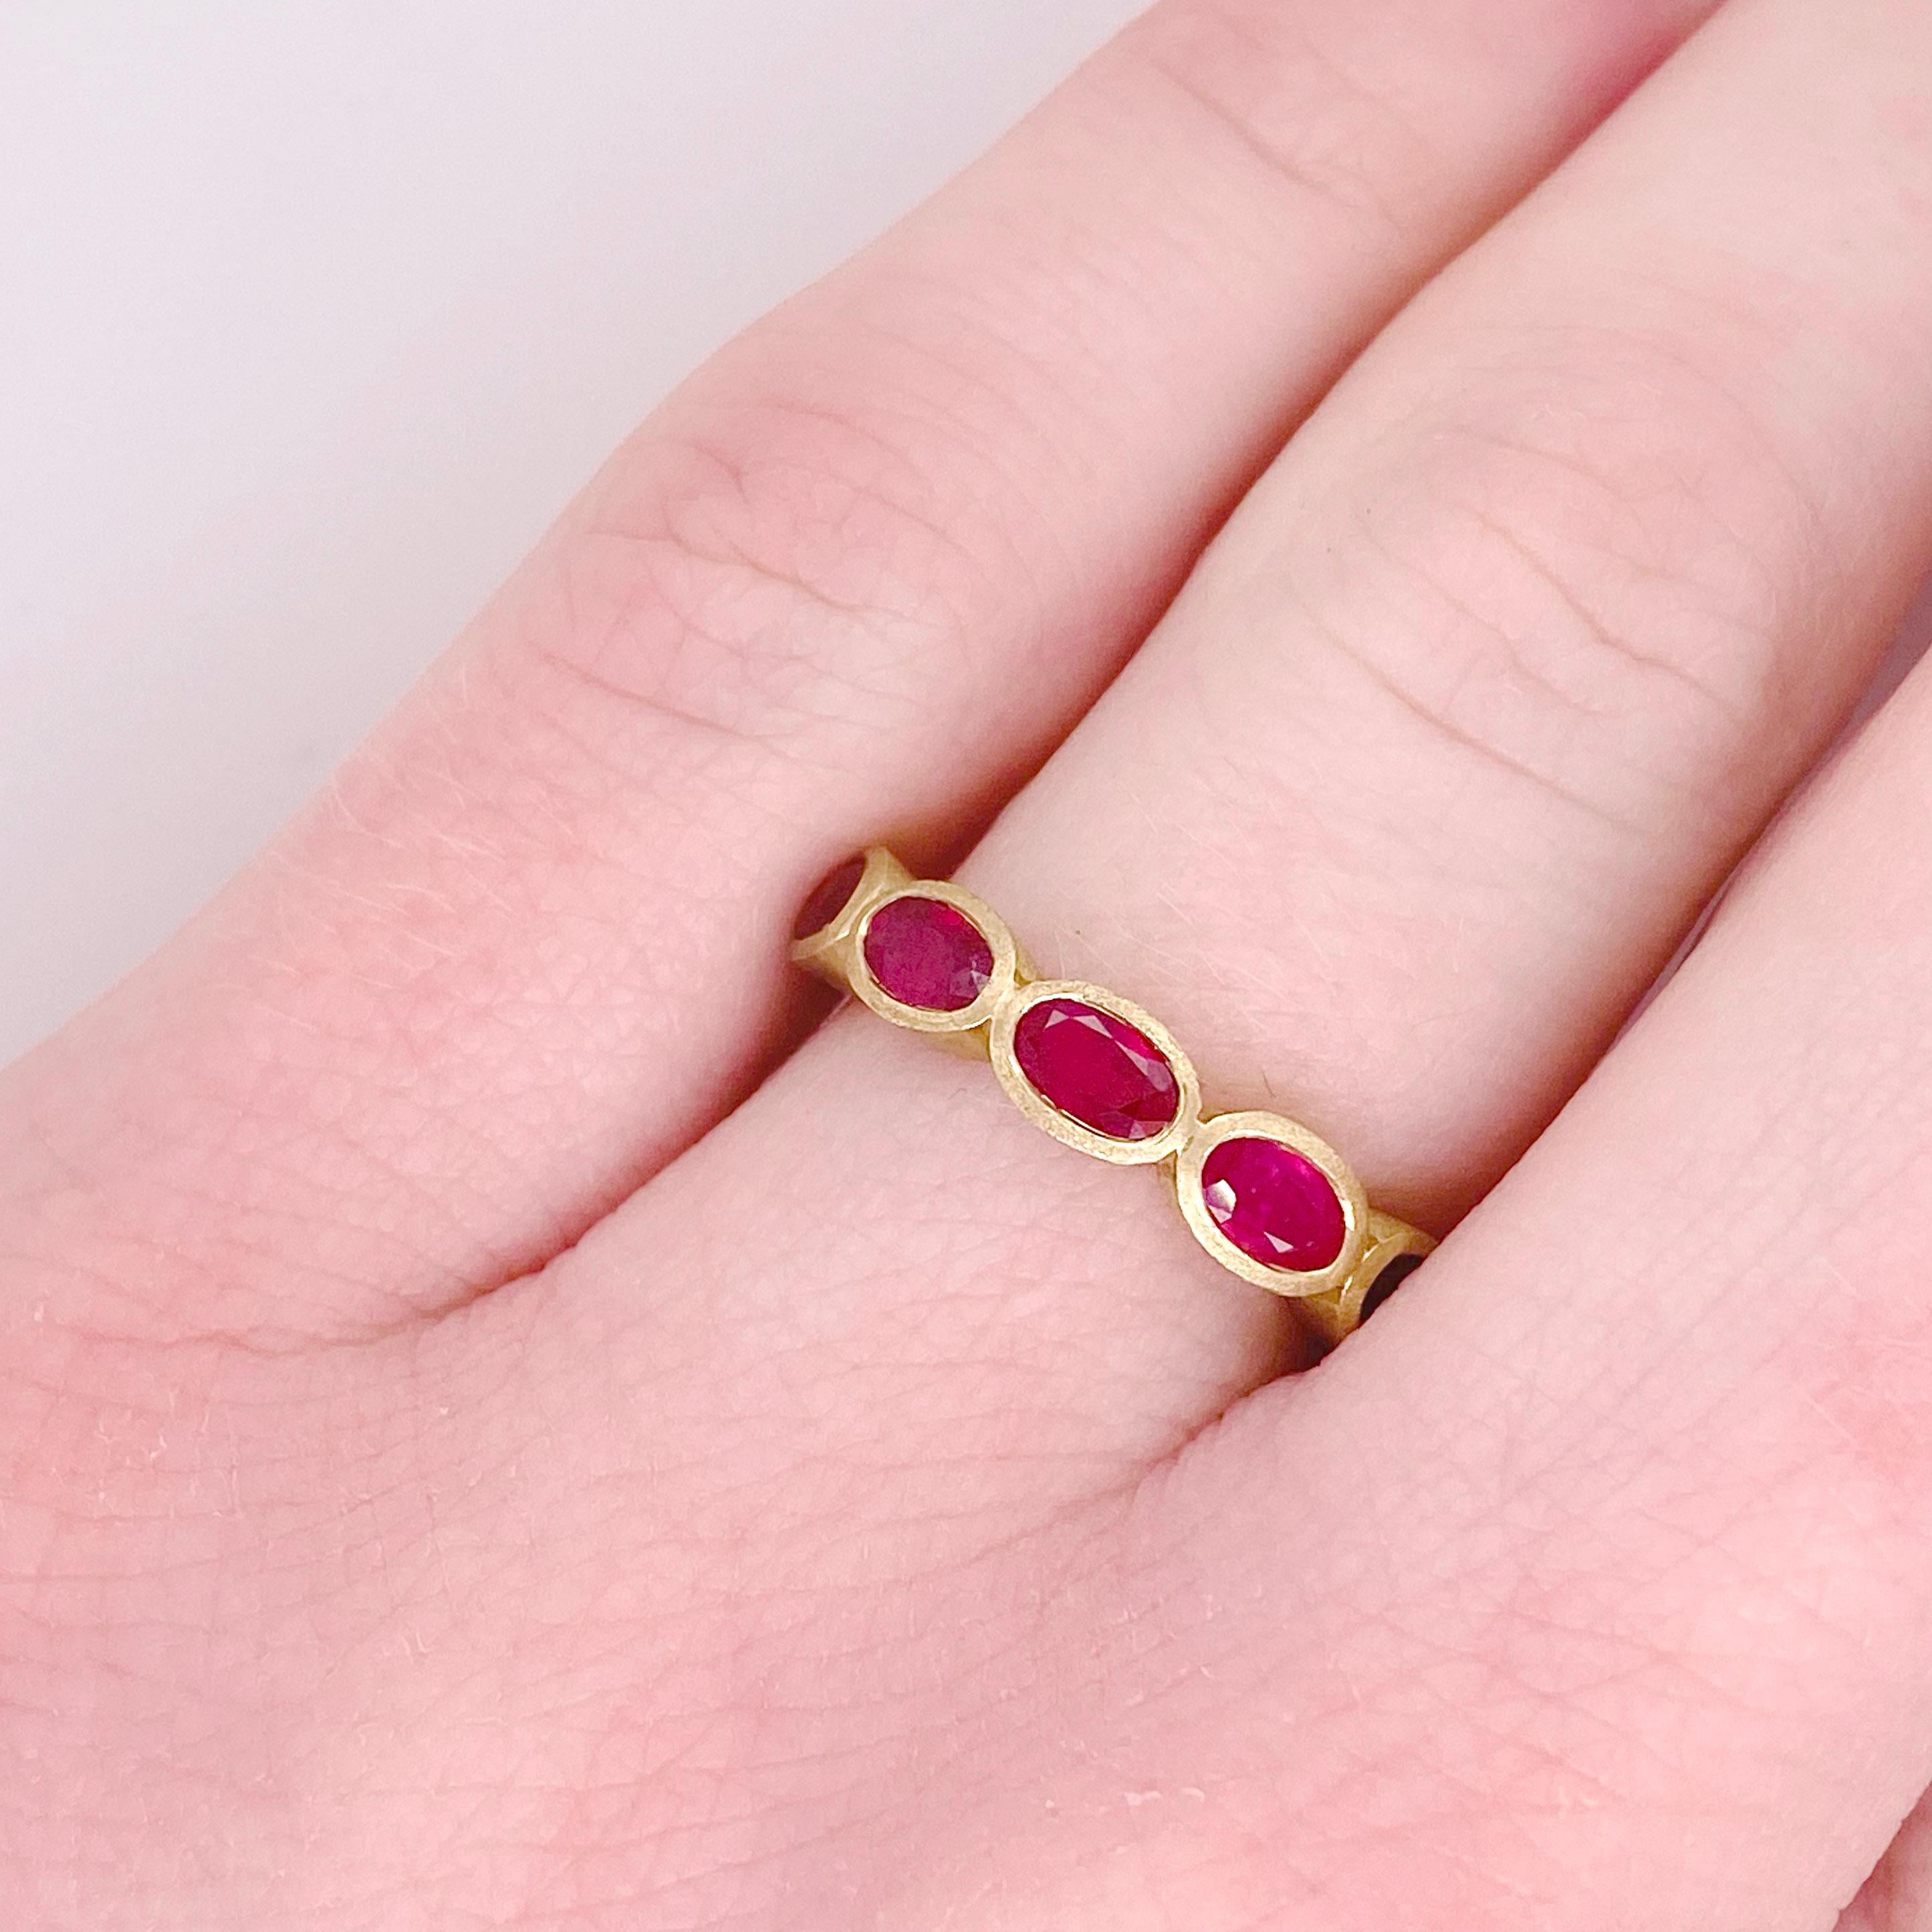 This 14 karat handmade ruby ring has five oval rubies set east to west. This dynamic design is gorgeous going across any finger. The five rubies have a total weight of 1.52 carats. The satin gold looks perfect when paired with high-polished rings.